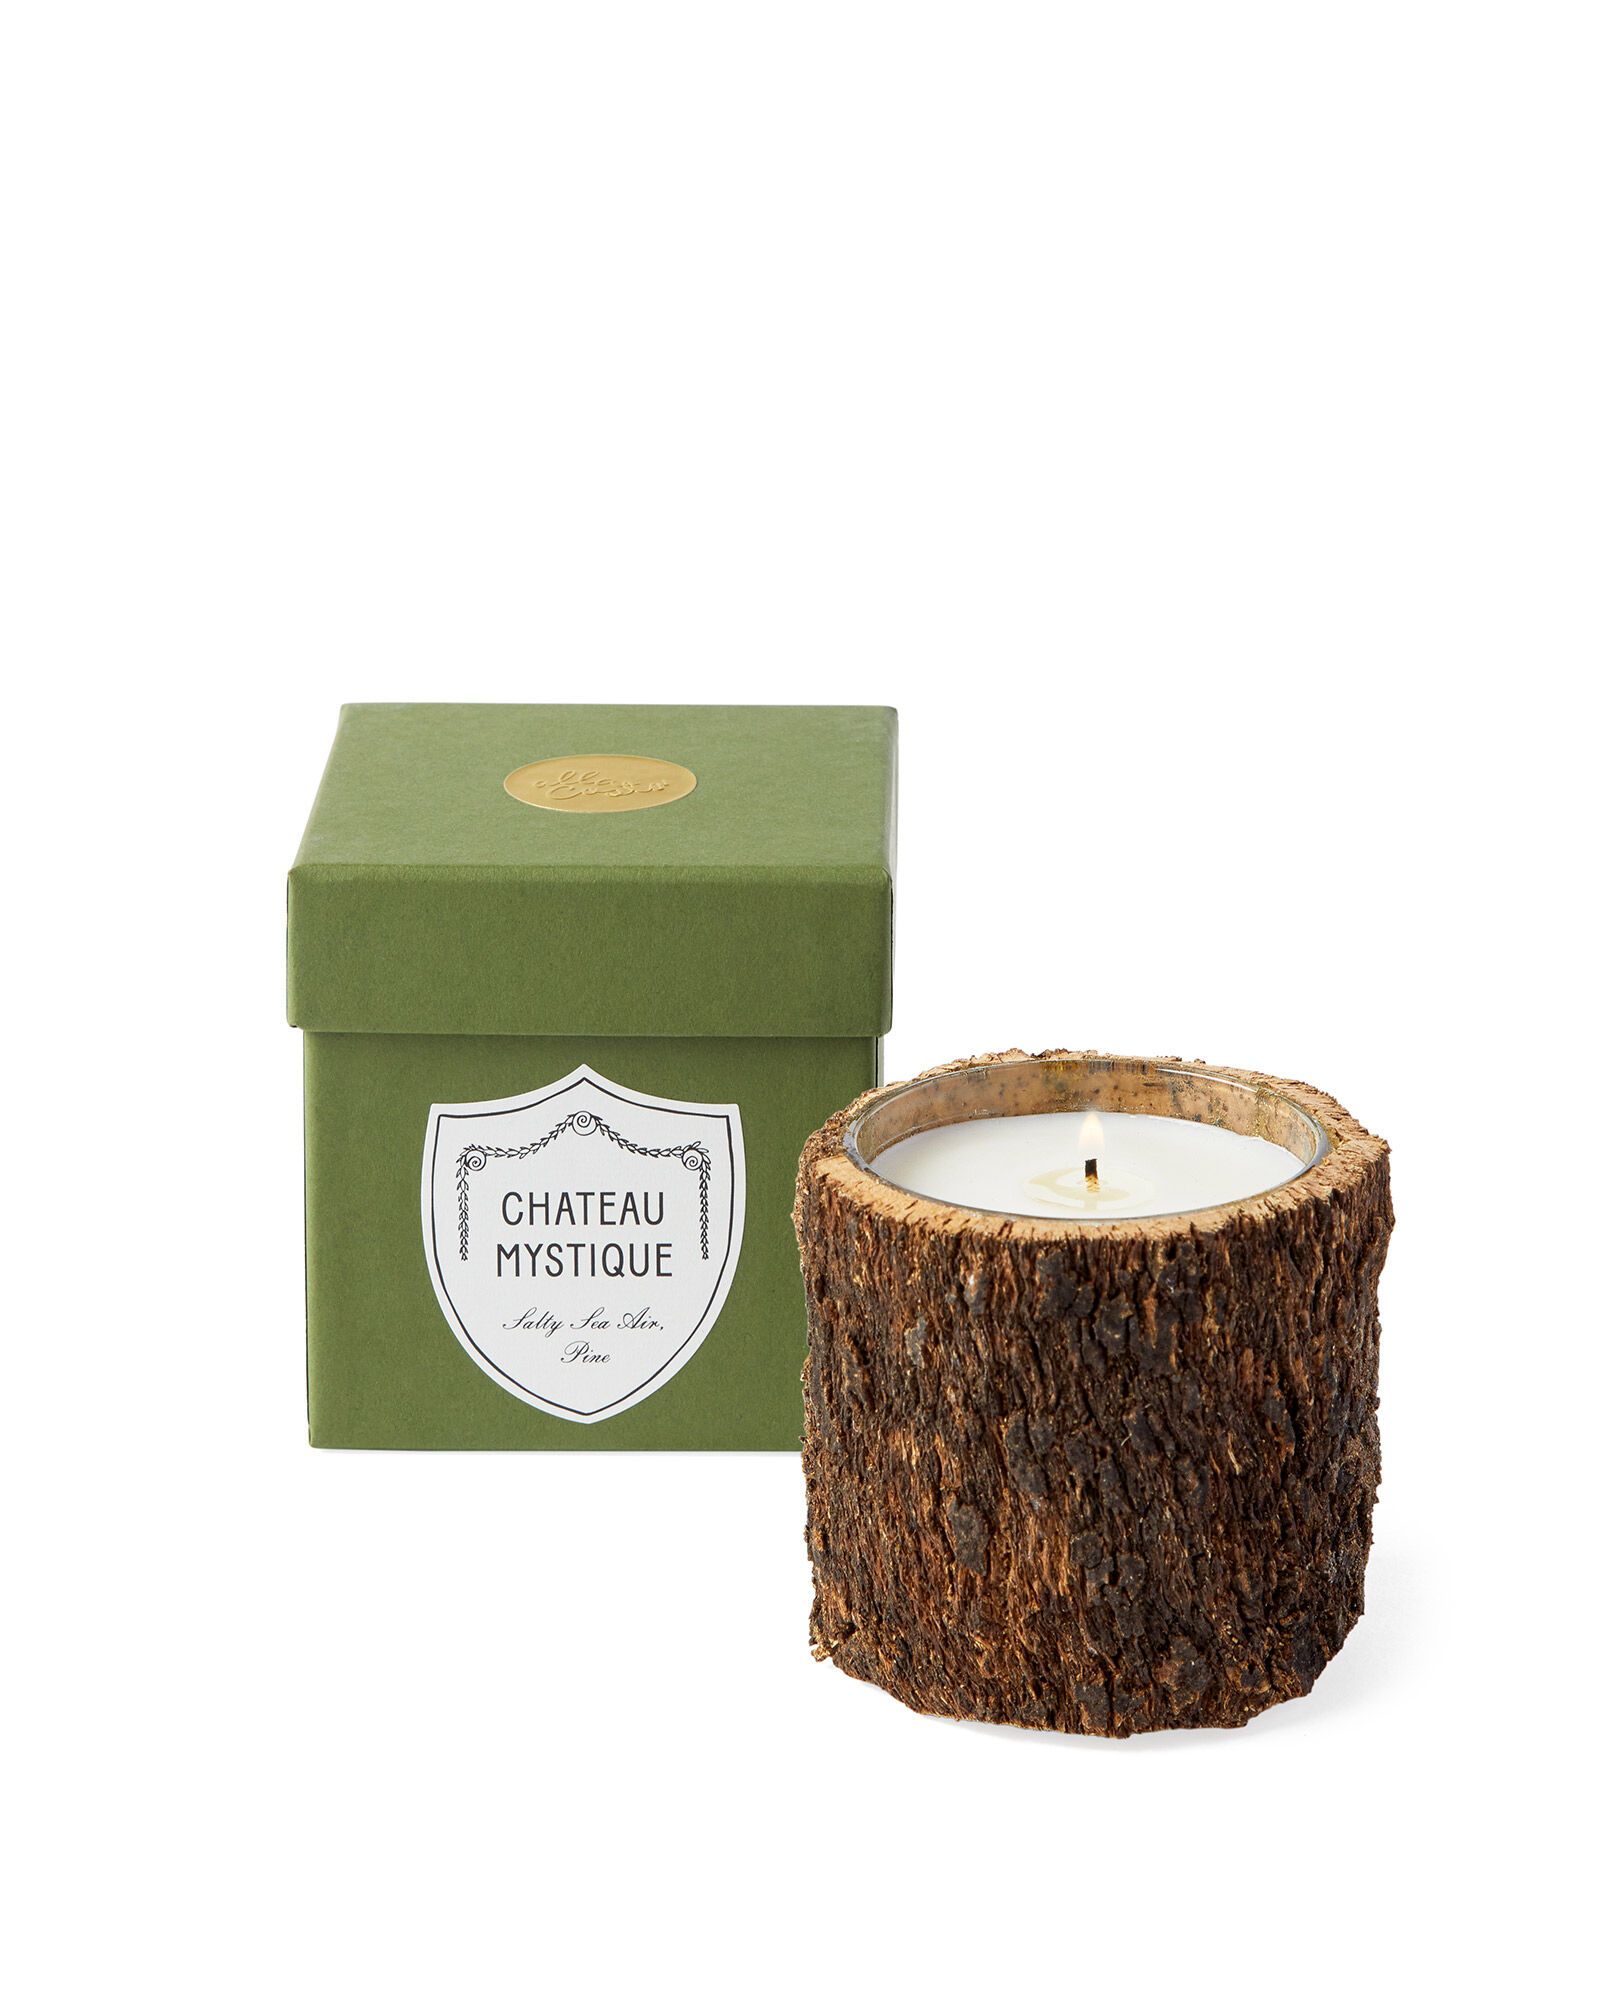 Chateau Mystique Candle by Alla Costa | Serena and Lily